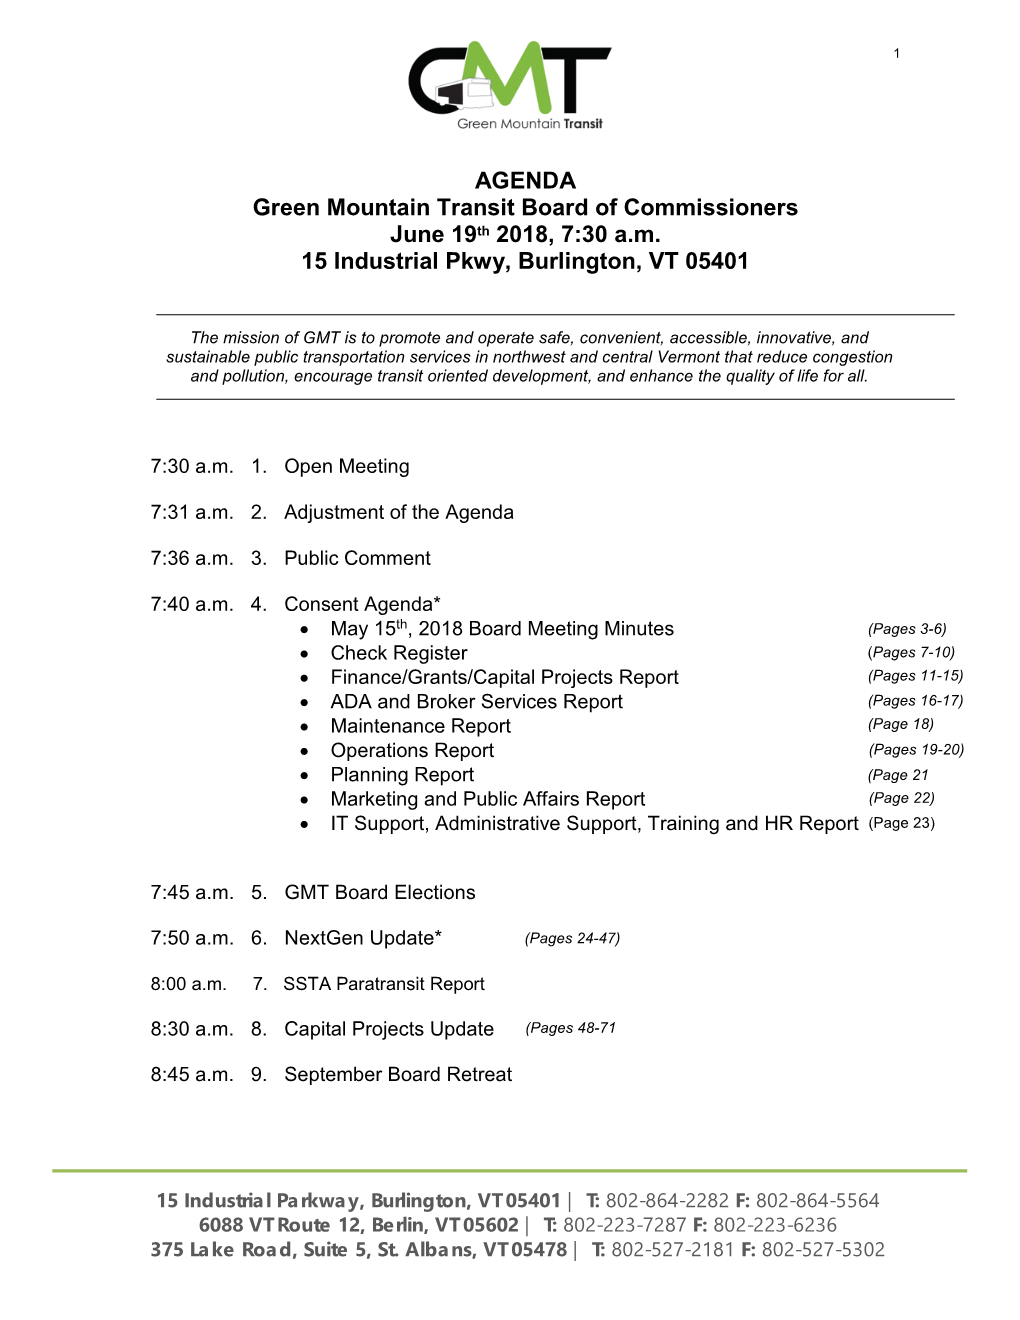 AGENDA Green Mountain Transit Board of Commissioners June 19Th 2018, 7:30 A.M